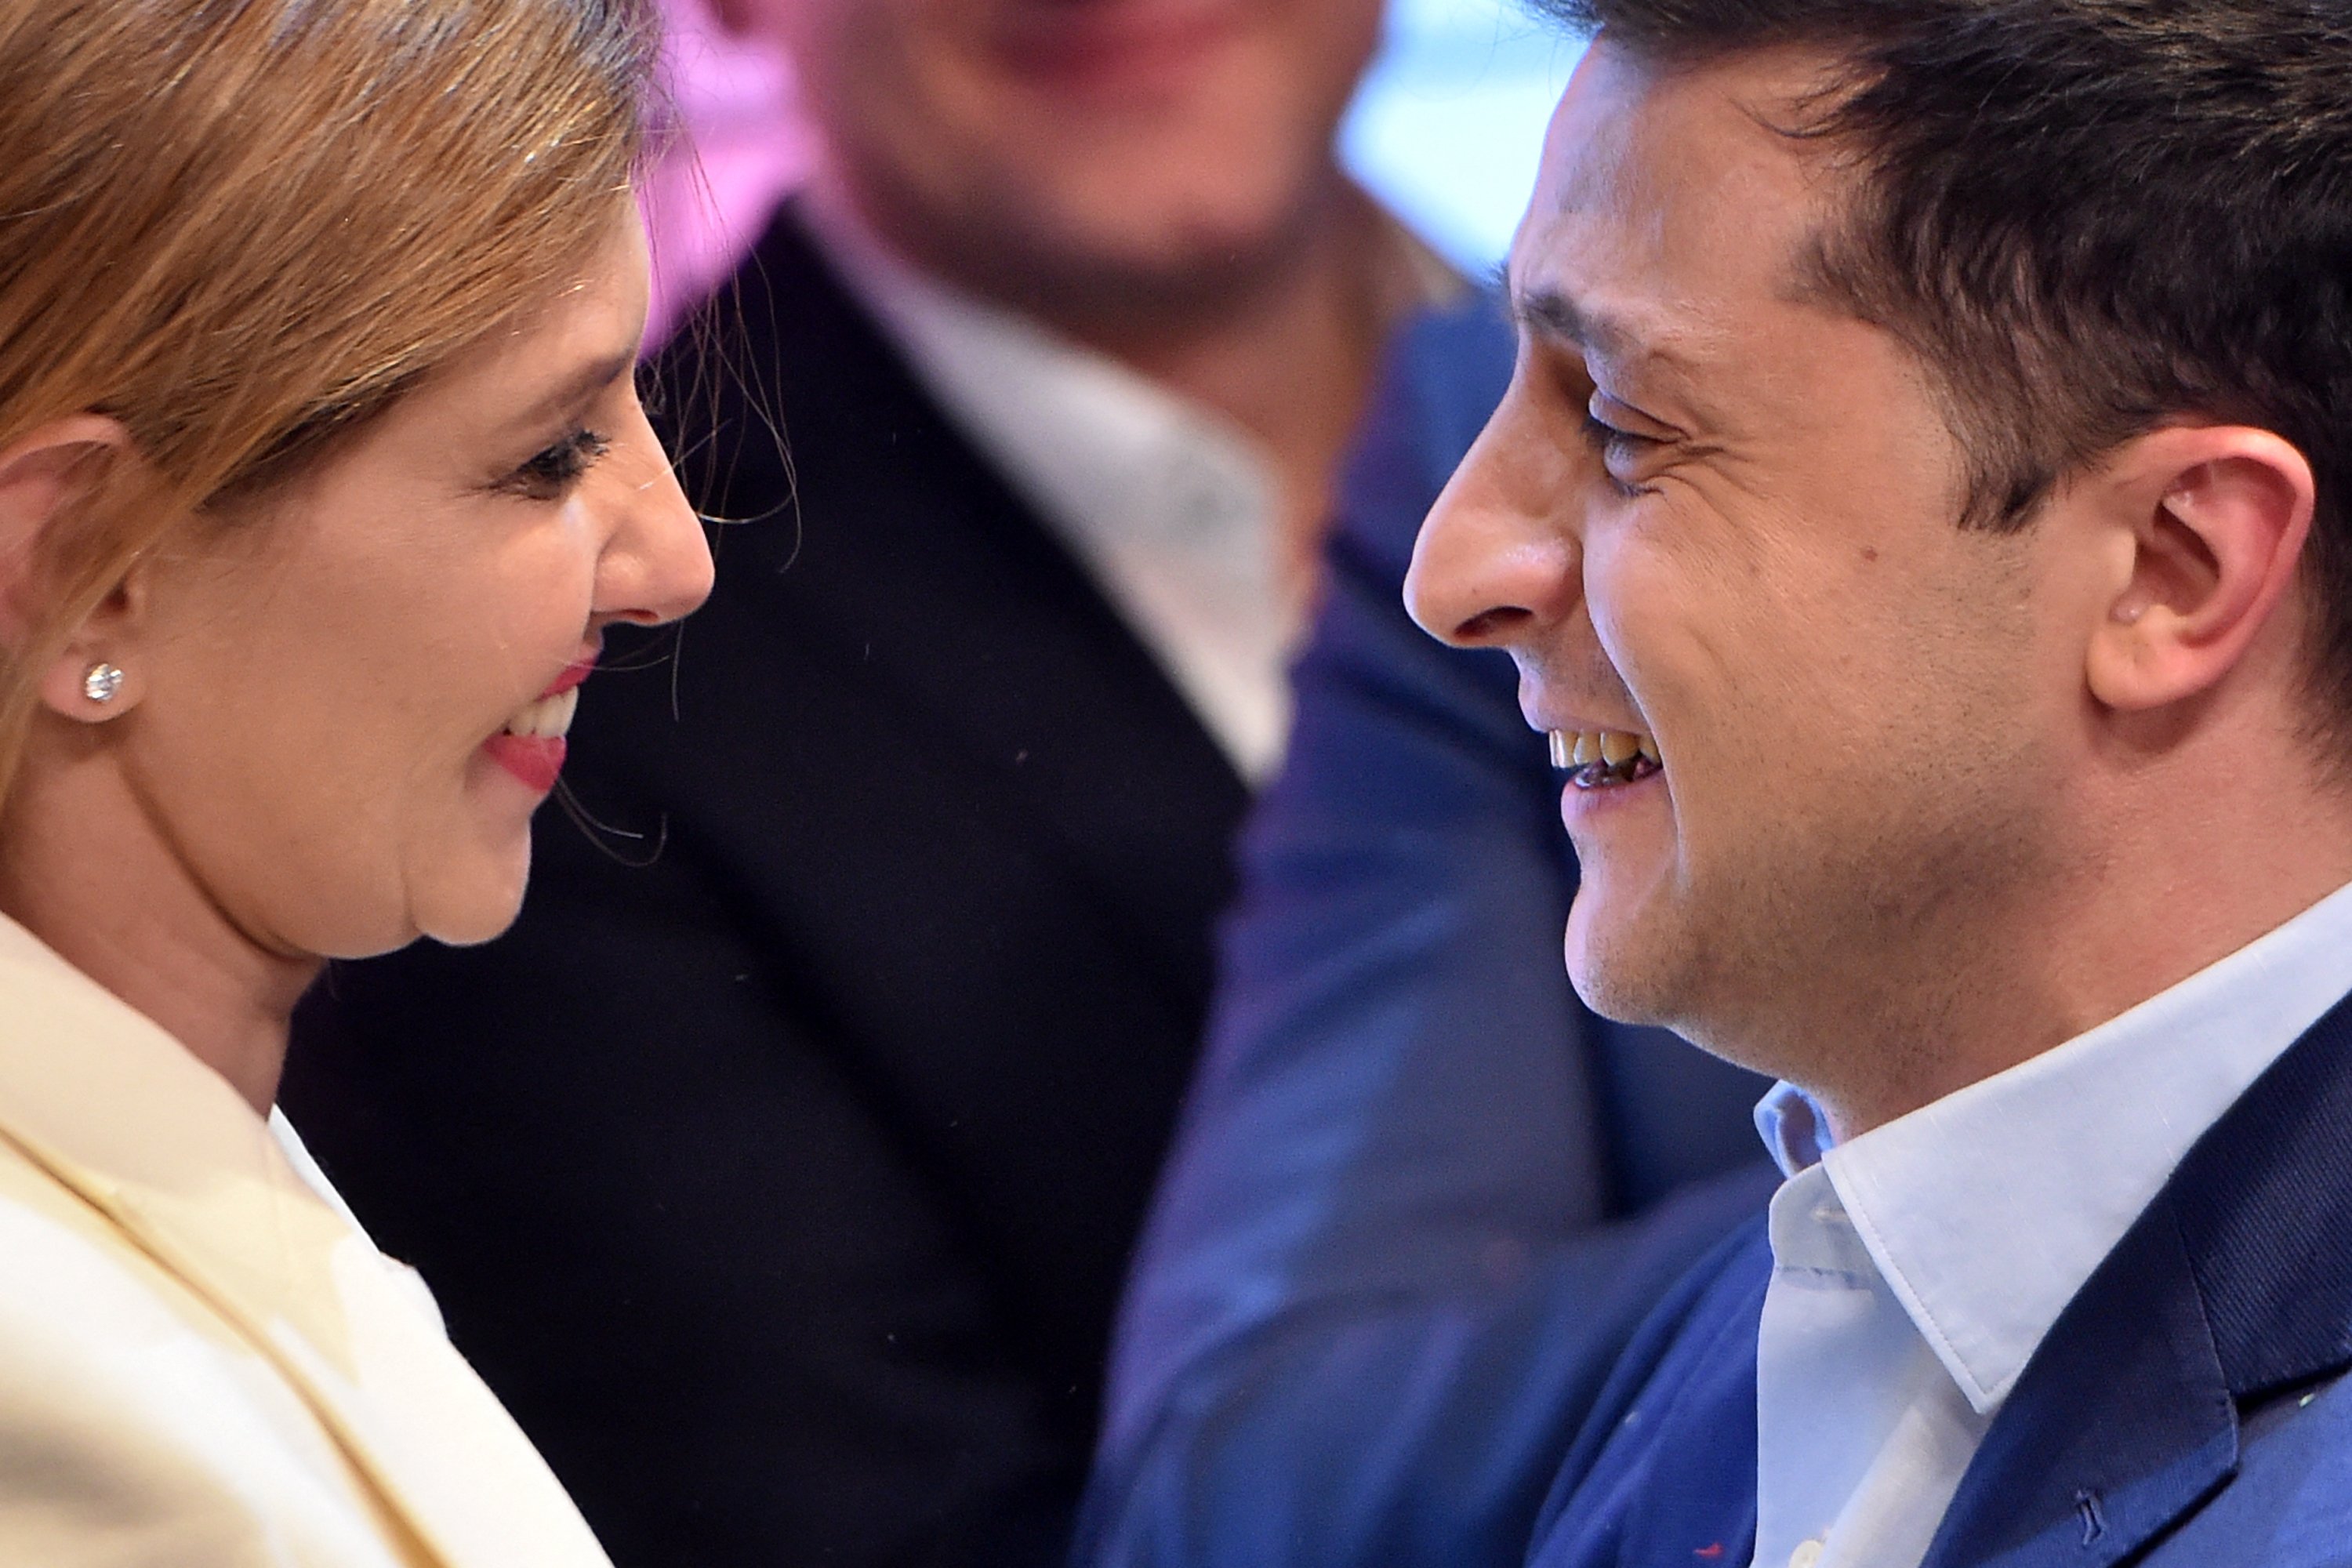 Ukrainian Presidential candidate Volodymyr Zelensky and his wife Olena at his campaign headquarters in Kiev on April 21, 2019. | Source: Sergei Gapon/AFP/Getty Images